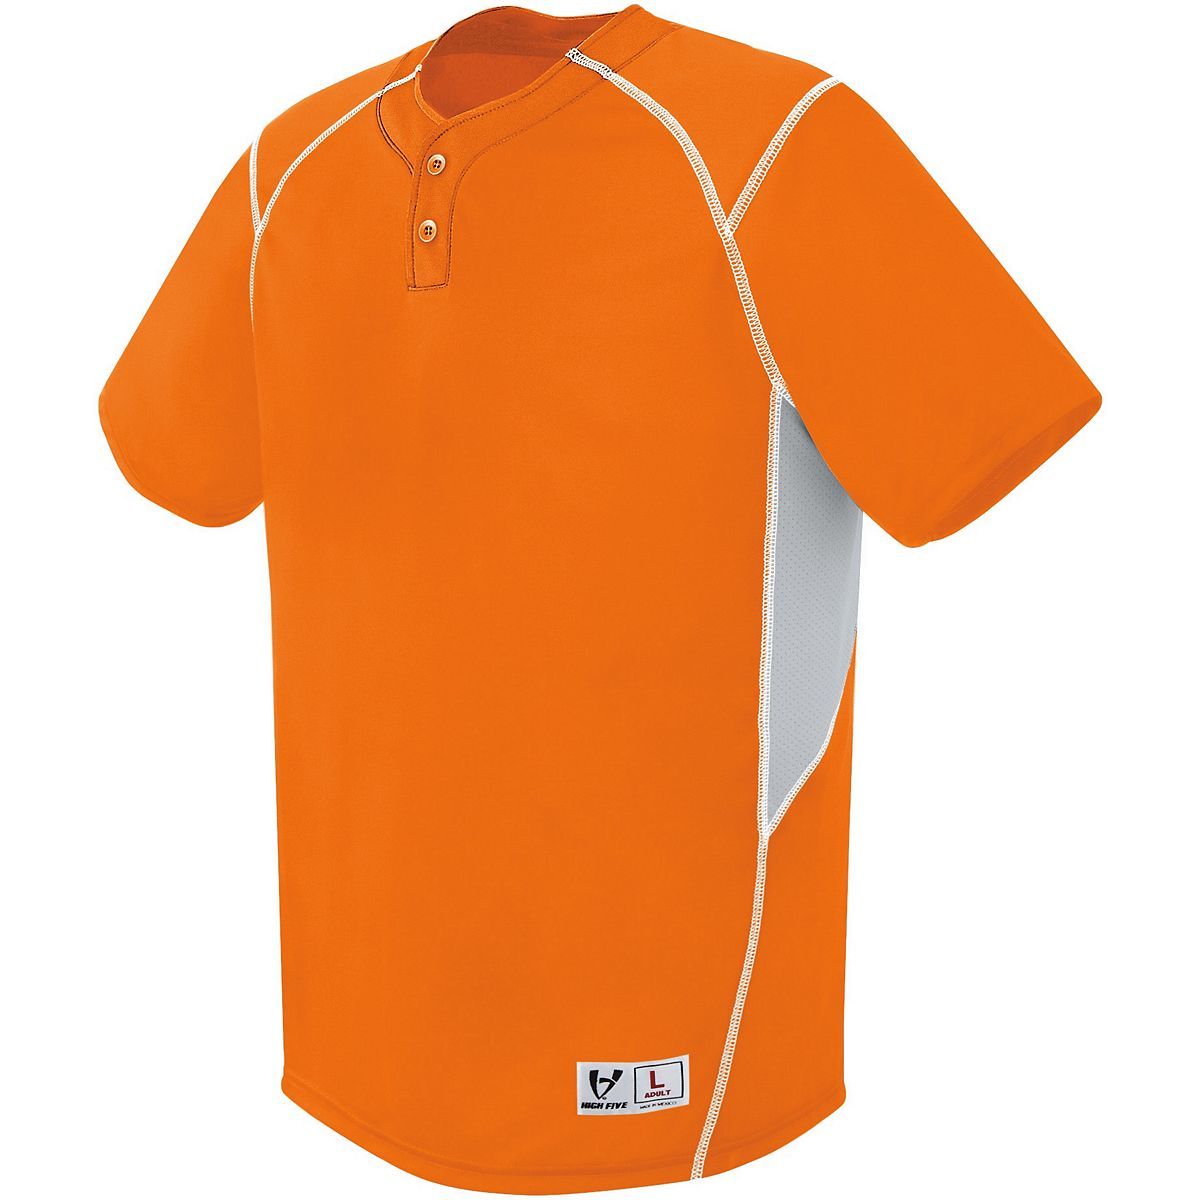 Augusta Sportswear Bandit Two-Button Jersey in Orange/Silver Grey/White  -Part of the Adult, Adult-Jersey, Augusta-Products, Baseball, Shirts, All-Sports, All-Sports-1 product lines at KanaleyCreations.com